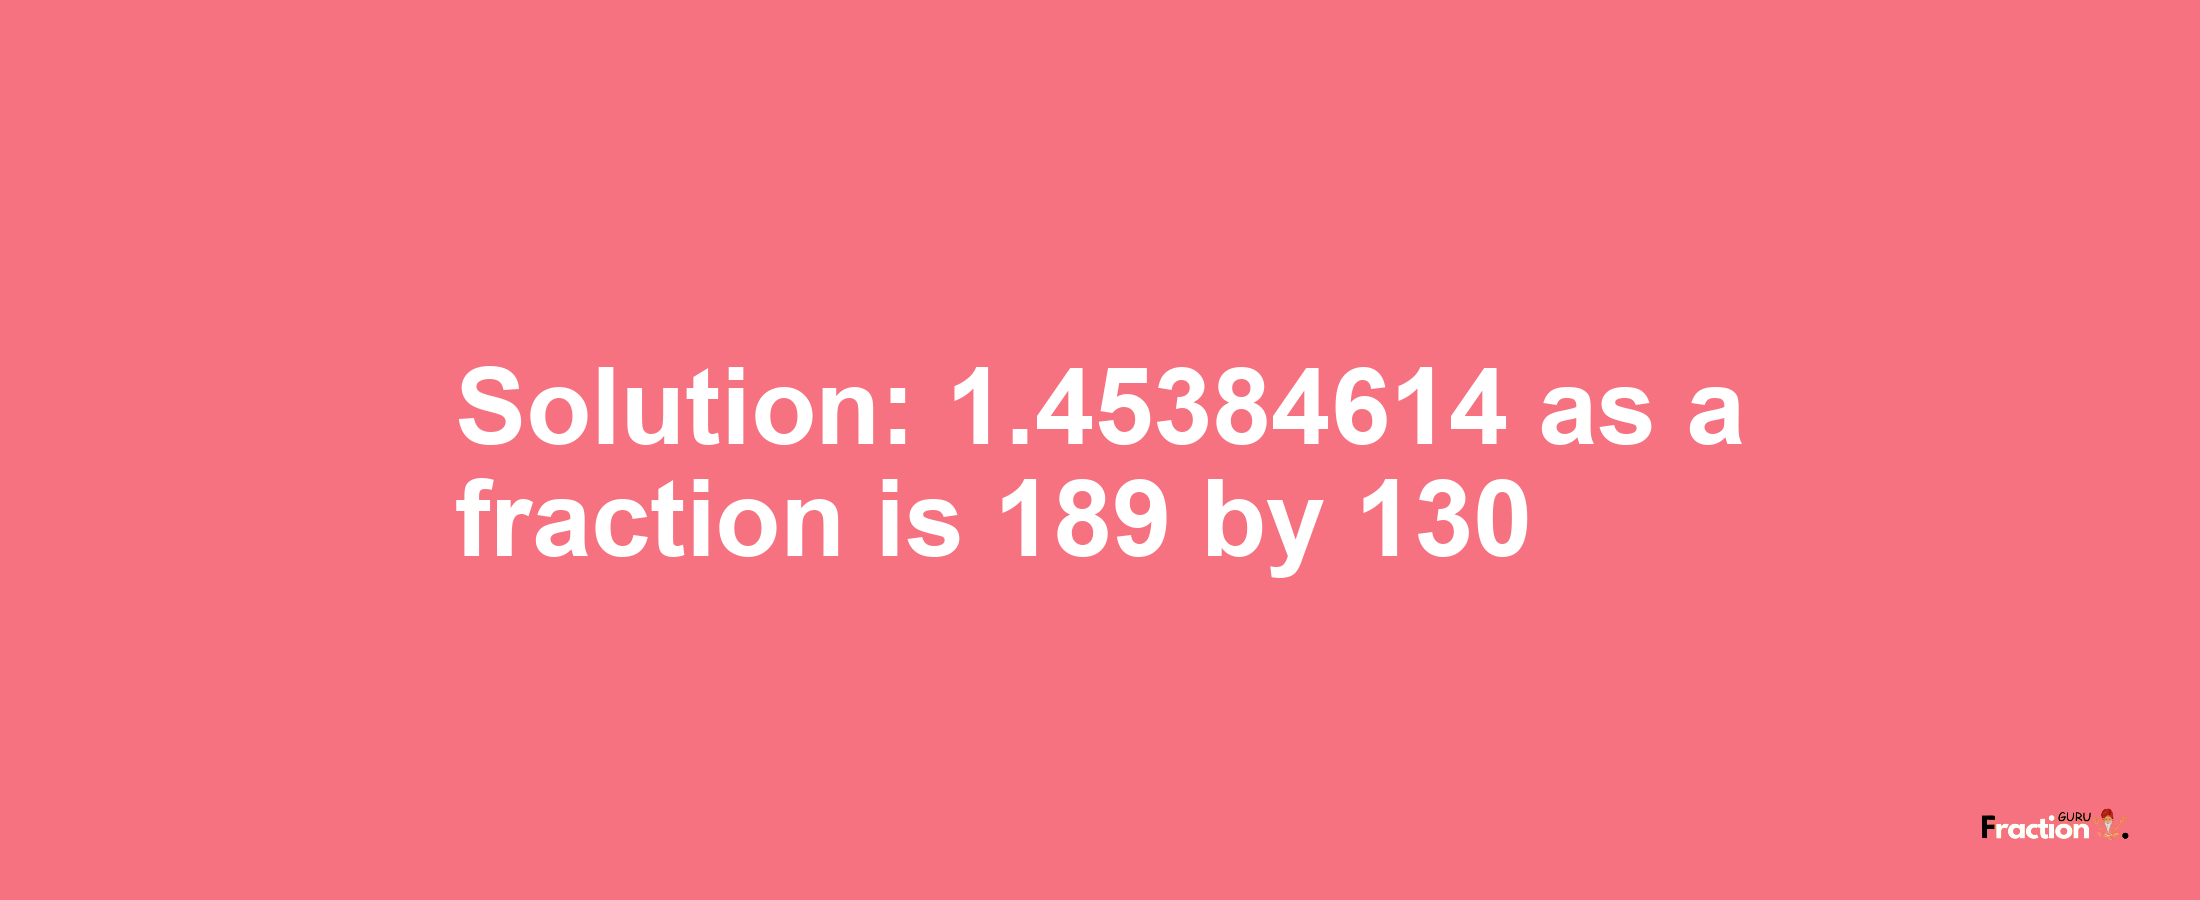 Solution:1.45384614 as a fraction is 189/130